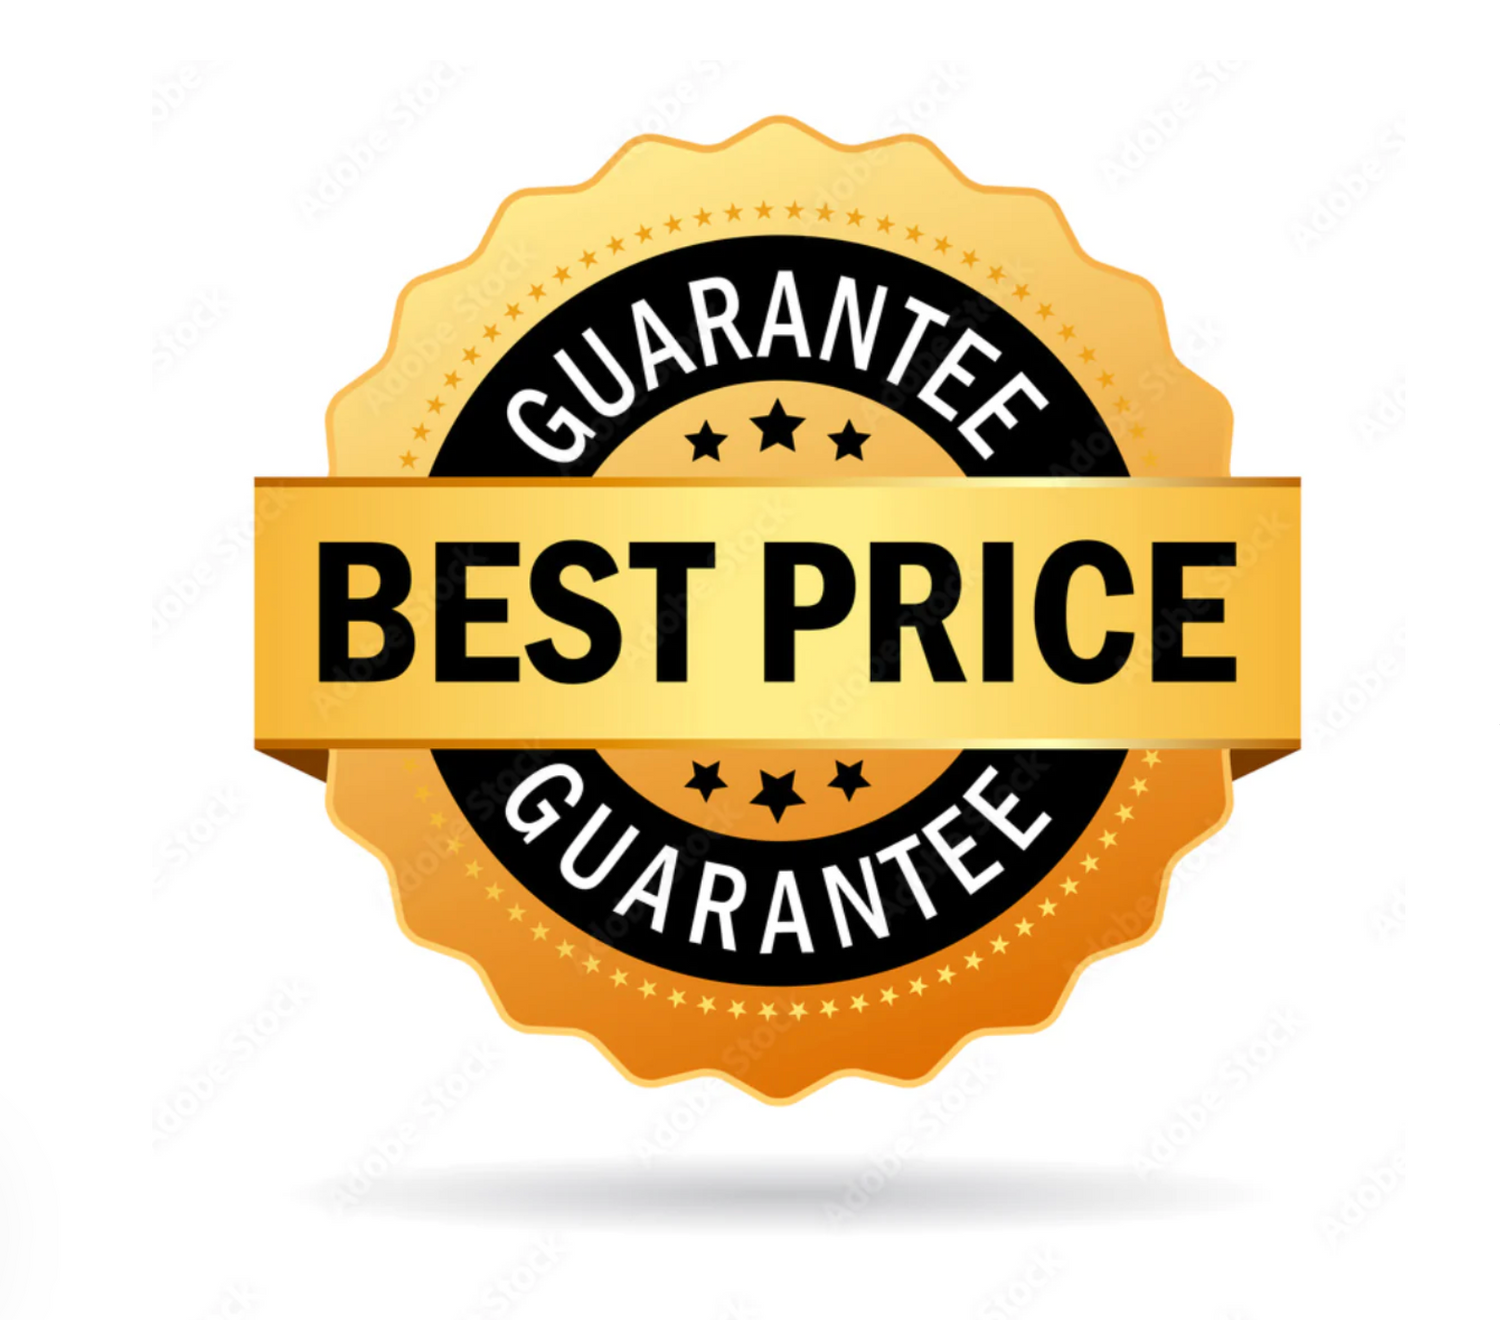 We've got the best prices in the industry... GUARANTEED!